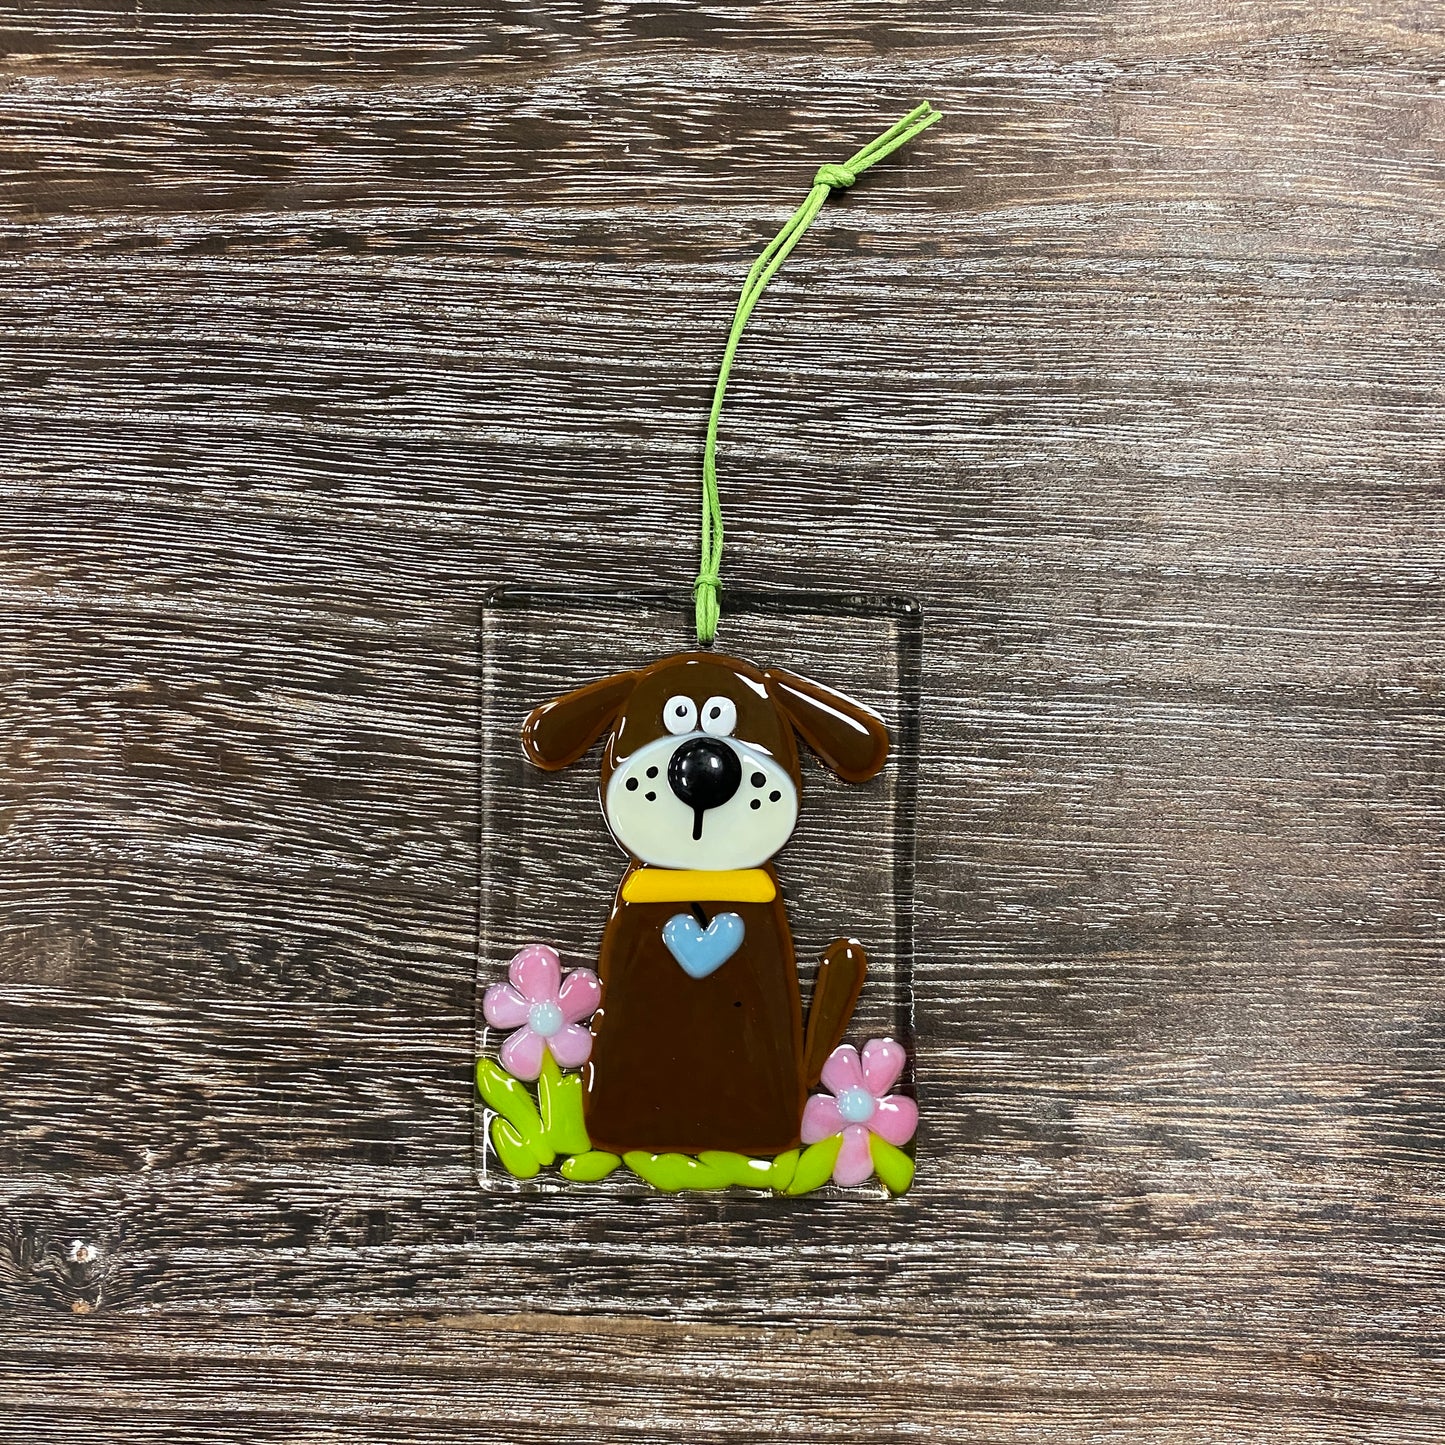 Fused Glass Suncatcher Ornament - Dog - Brown with Pink Flowers